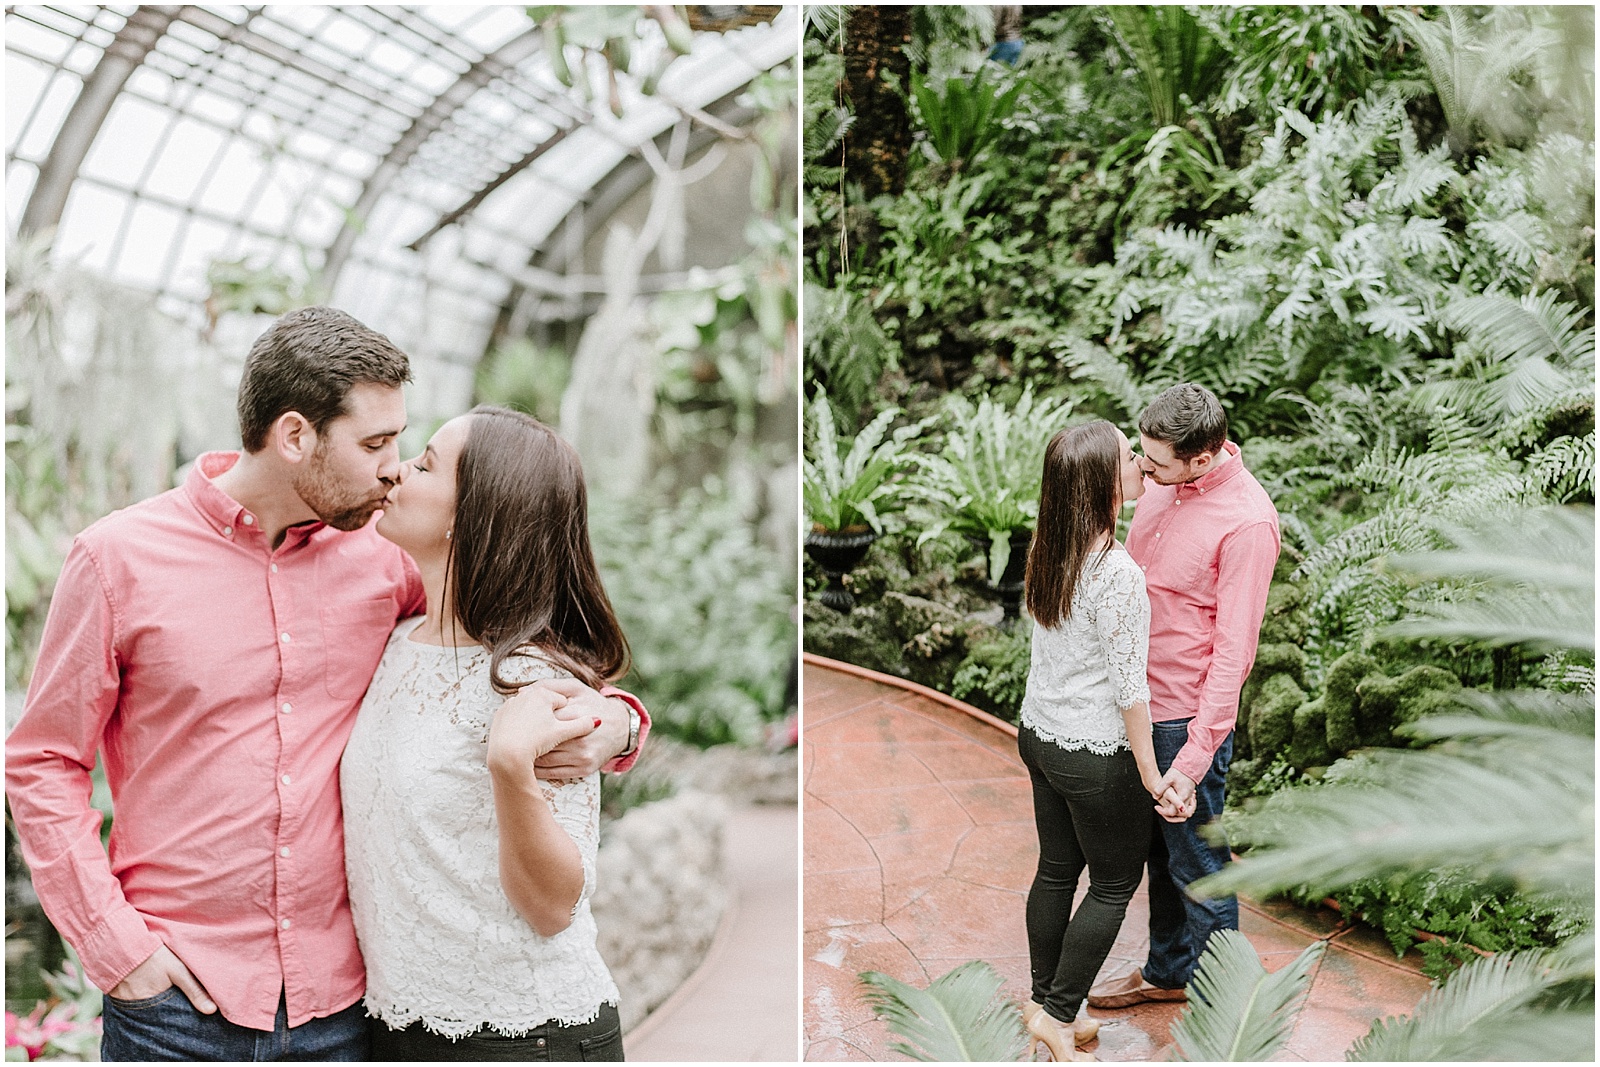 Greenhouse engagement photo session in Chicago